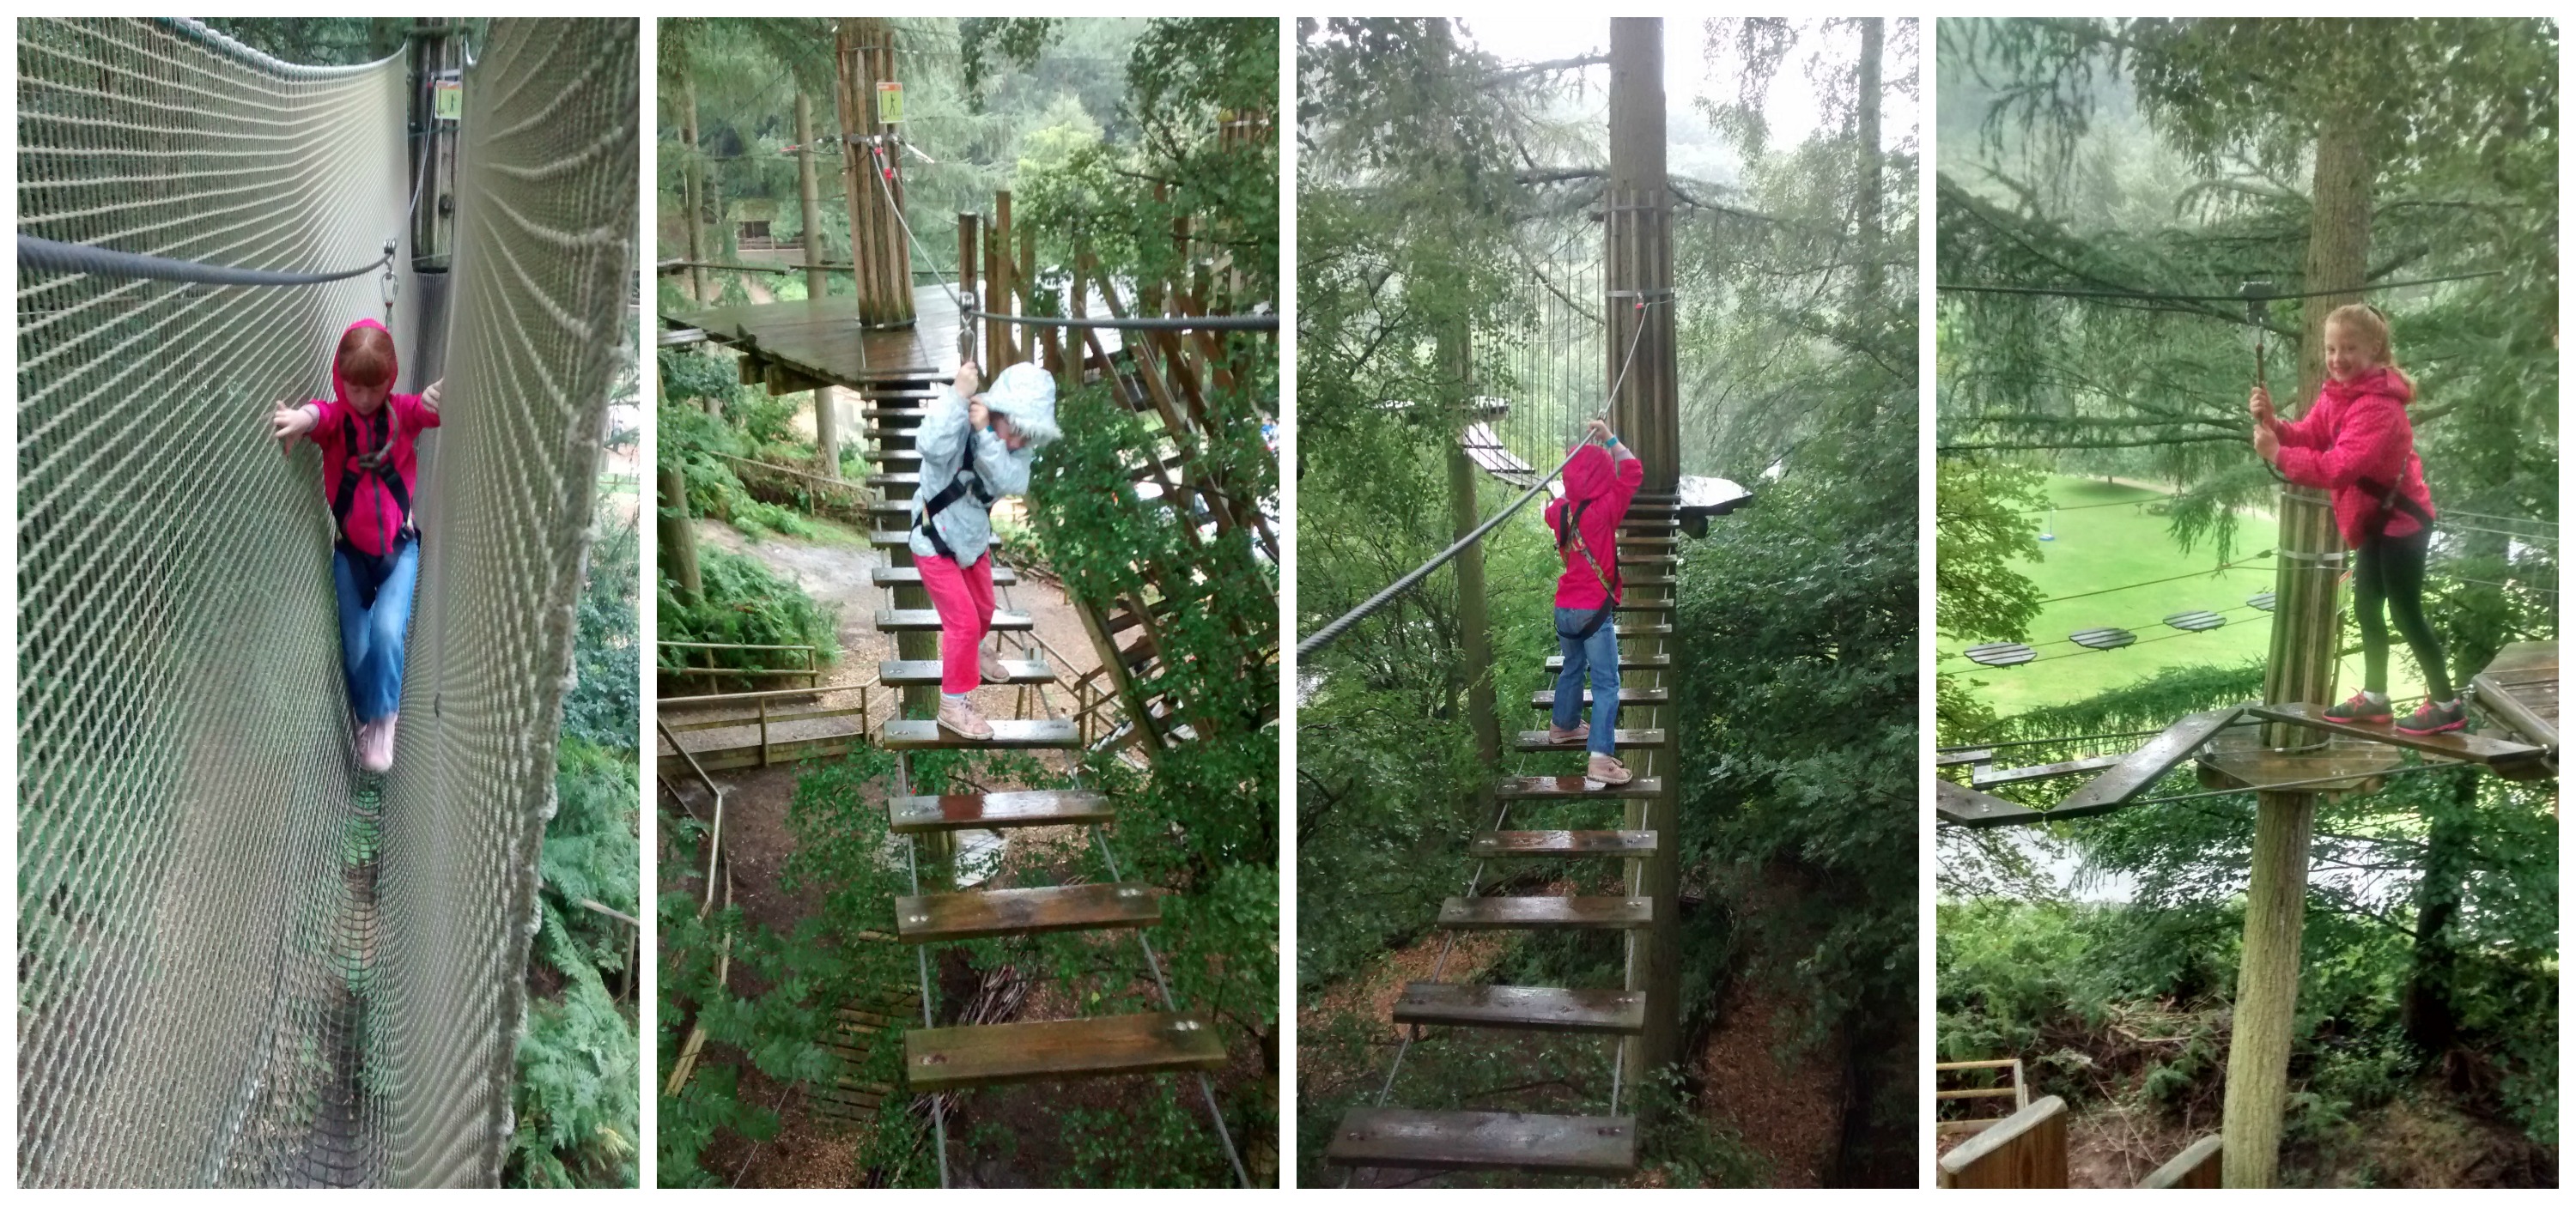 Tree top Junior at Go Ape Dalby Forest